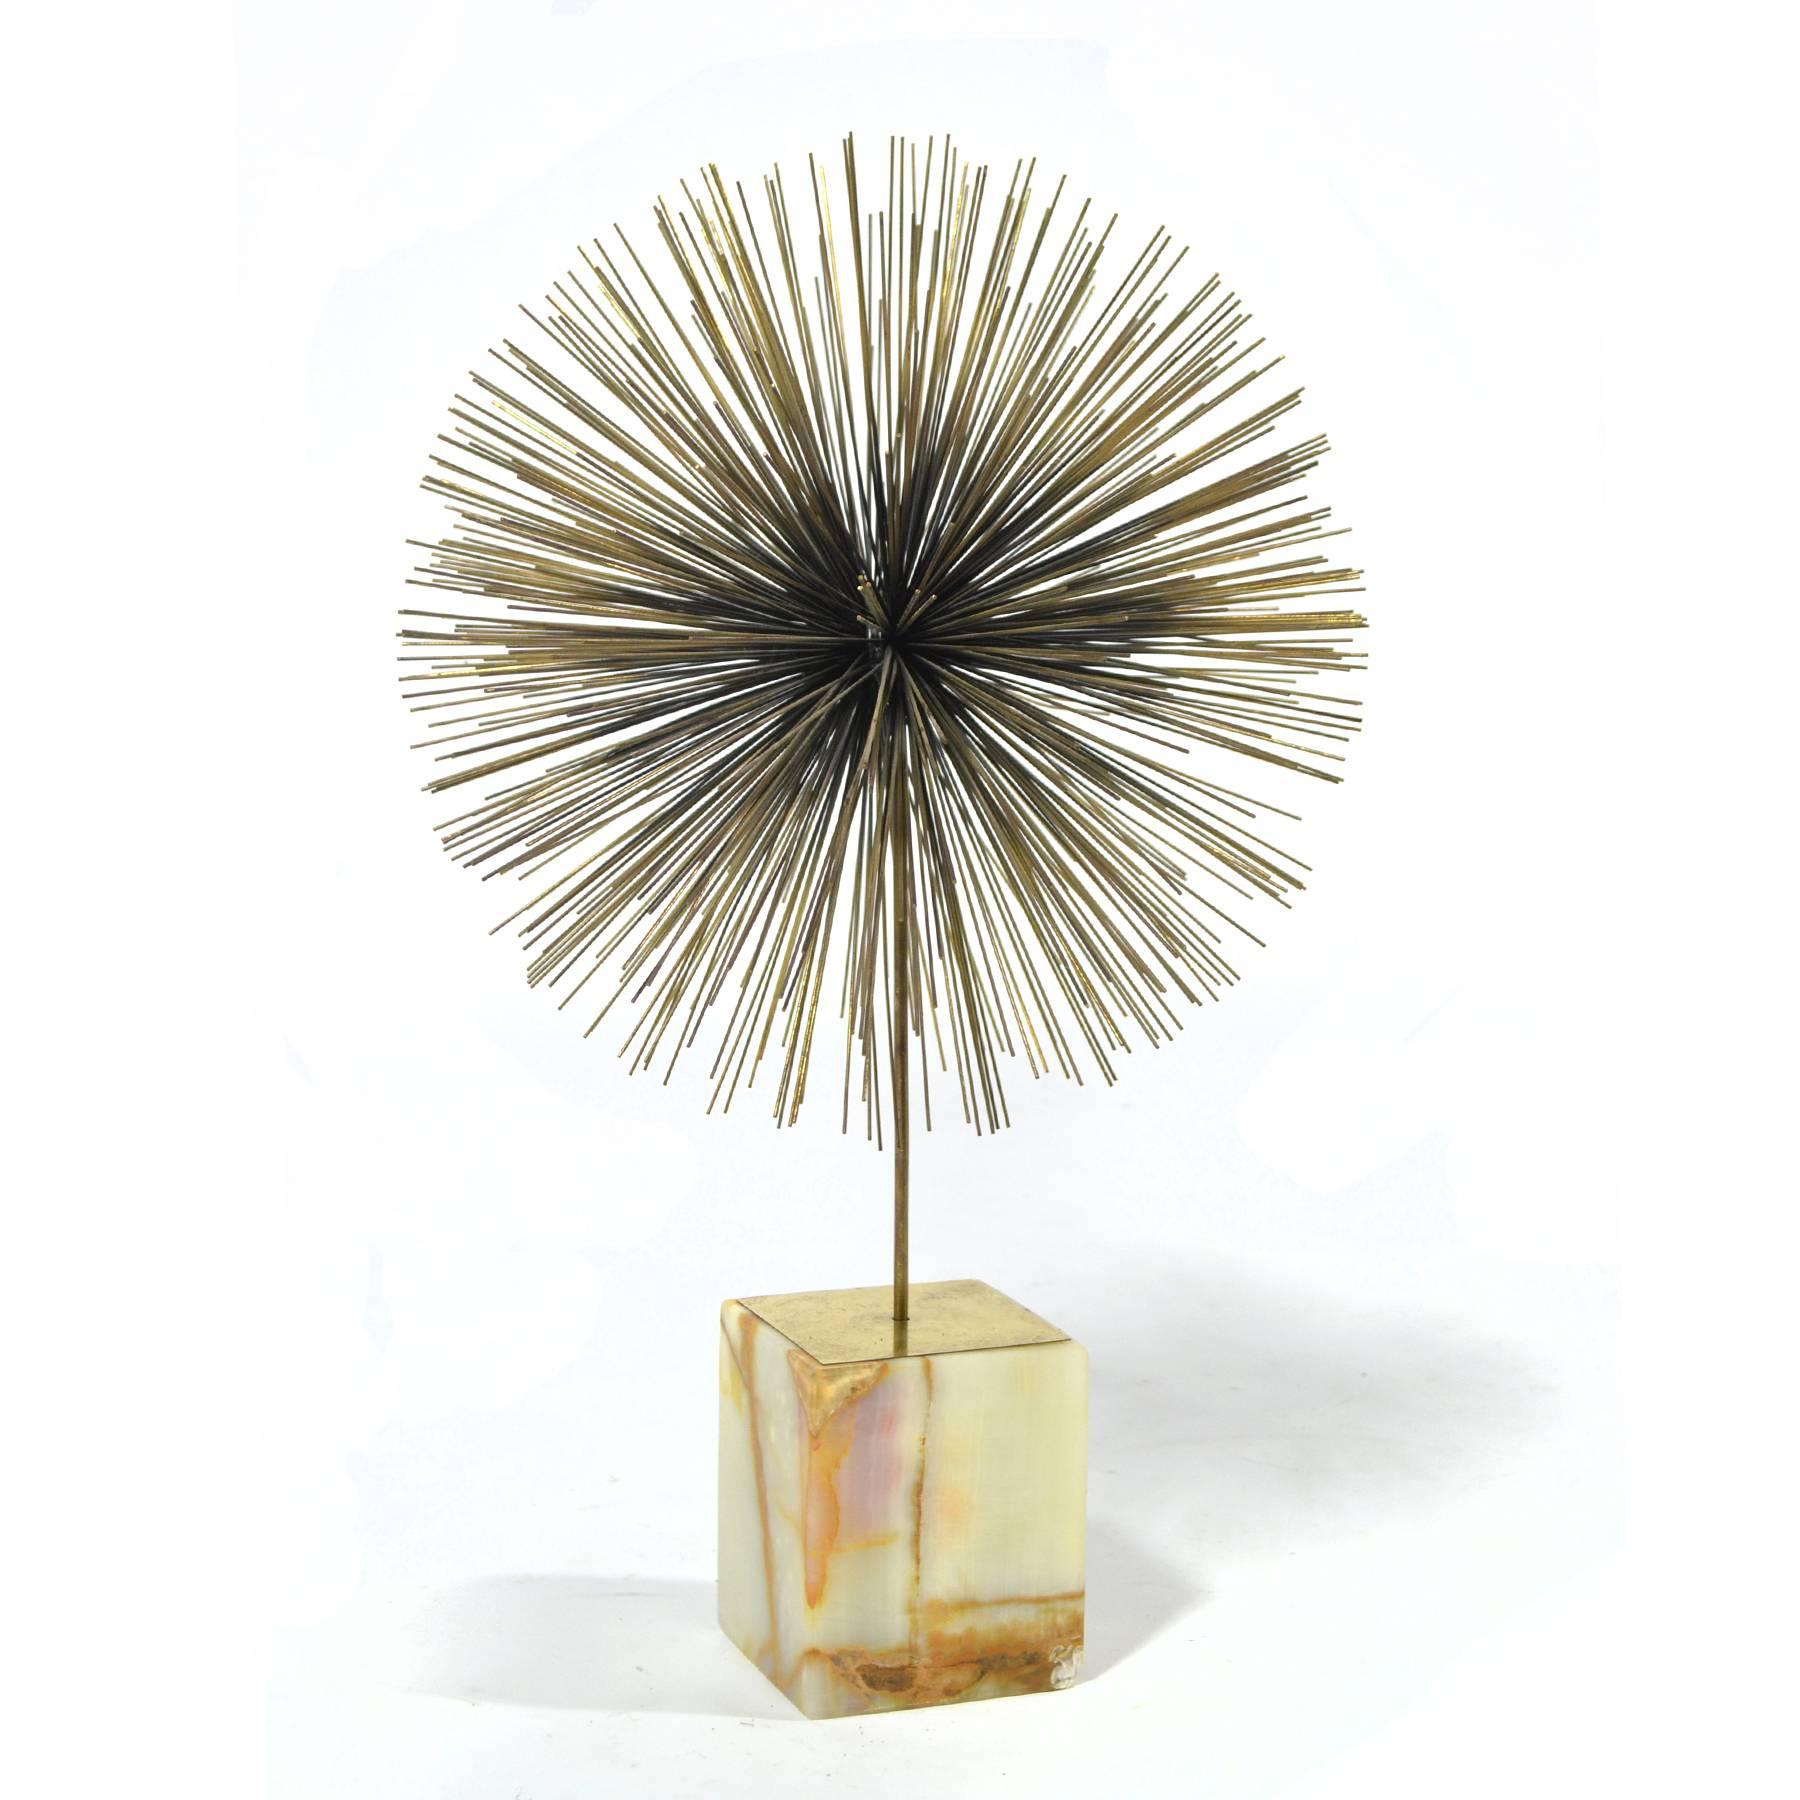 Probably our favourite of all the dandelion or sunburst sculptures created by Jeré is this table top version which features a single round form supported atop an onyx base.